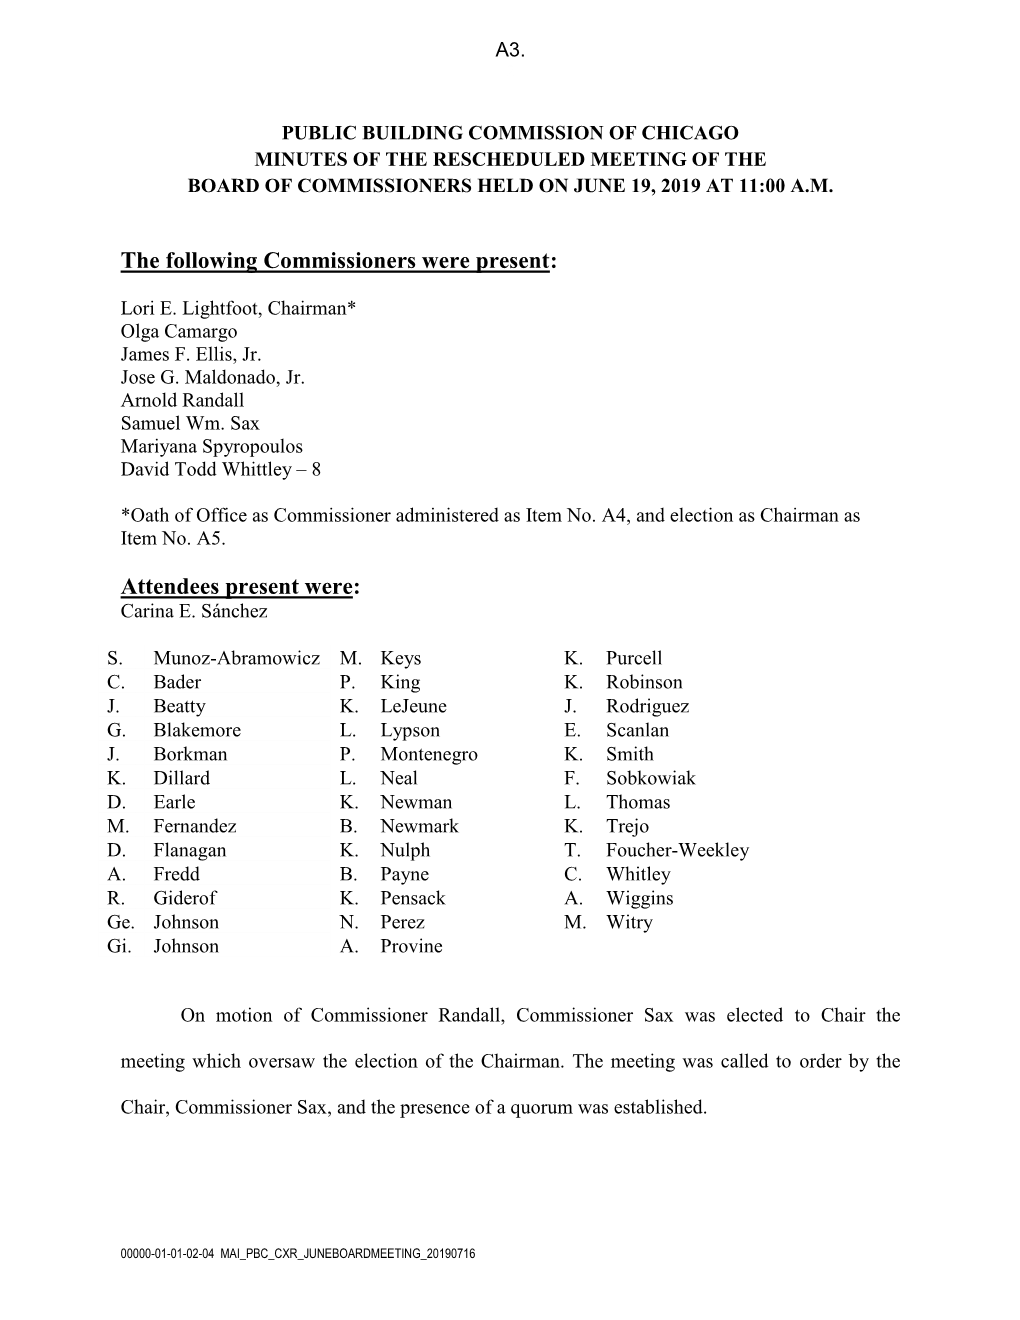 Public Building Commission of Chicago Minutes of the Rescheduled Meeting of the Board of Commissioners Held on June 19, 2019 at 11:00 A.M